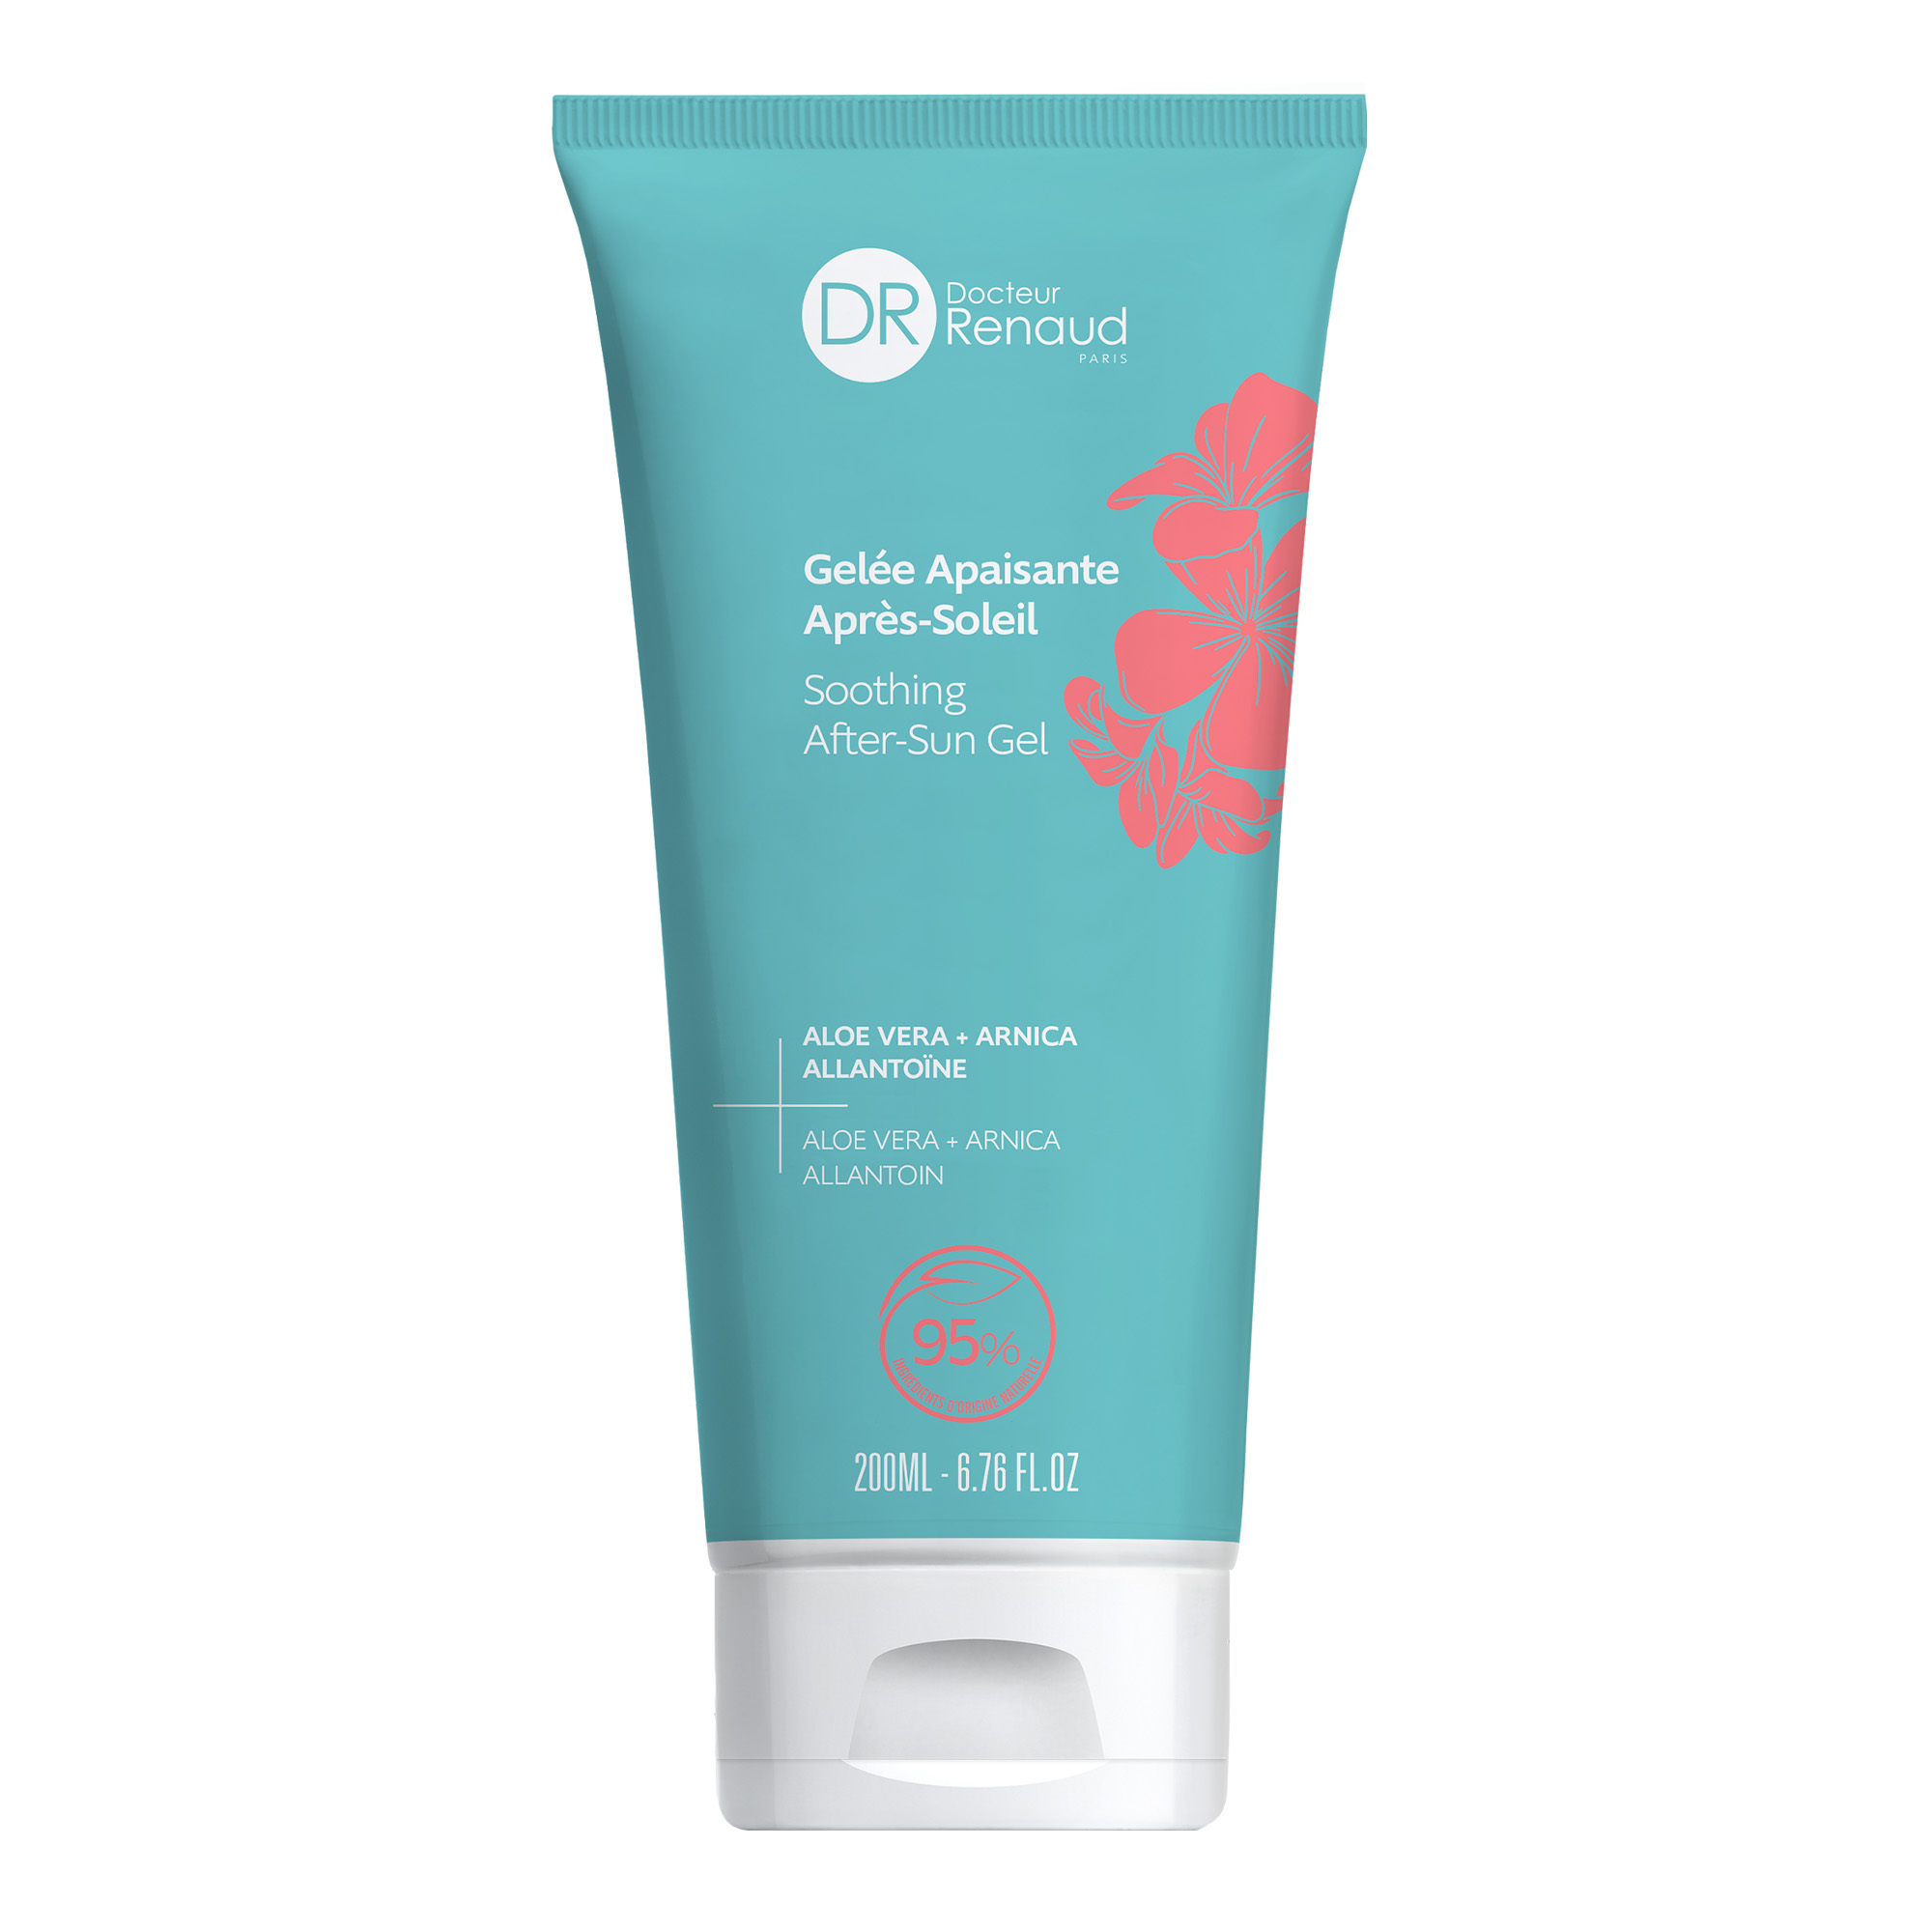 Soothing after-sun gel with Frangipani flowers 200 ml